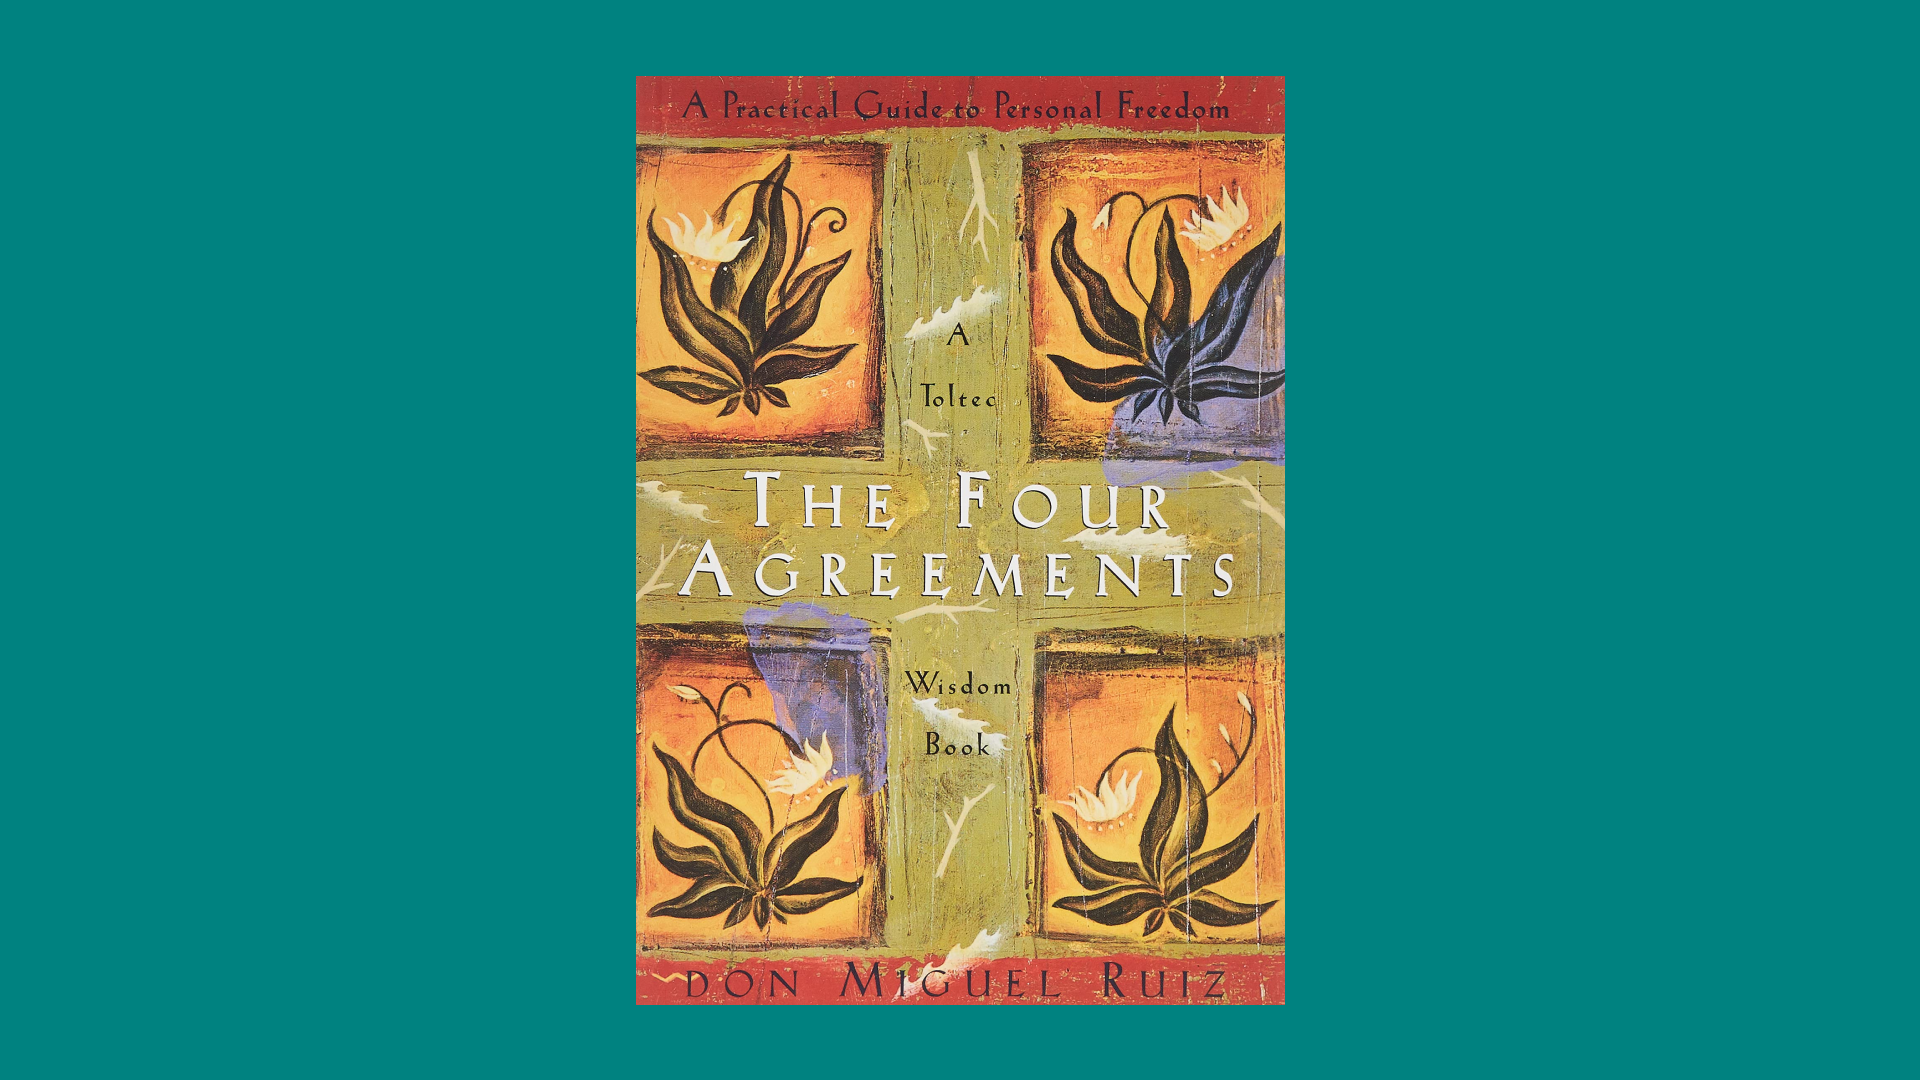 “The Four Agreements” by Don Miguel Ruiz 